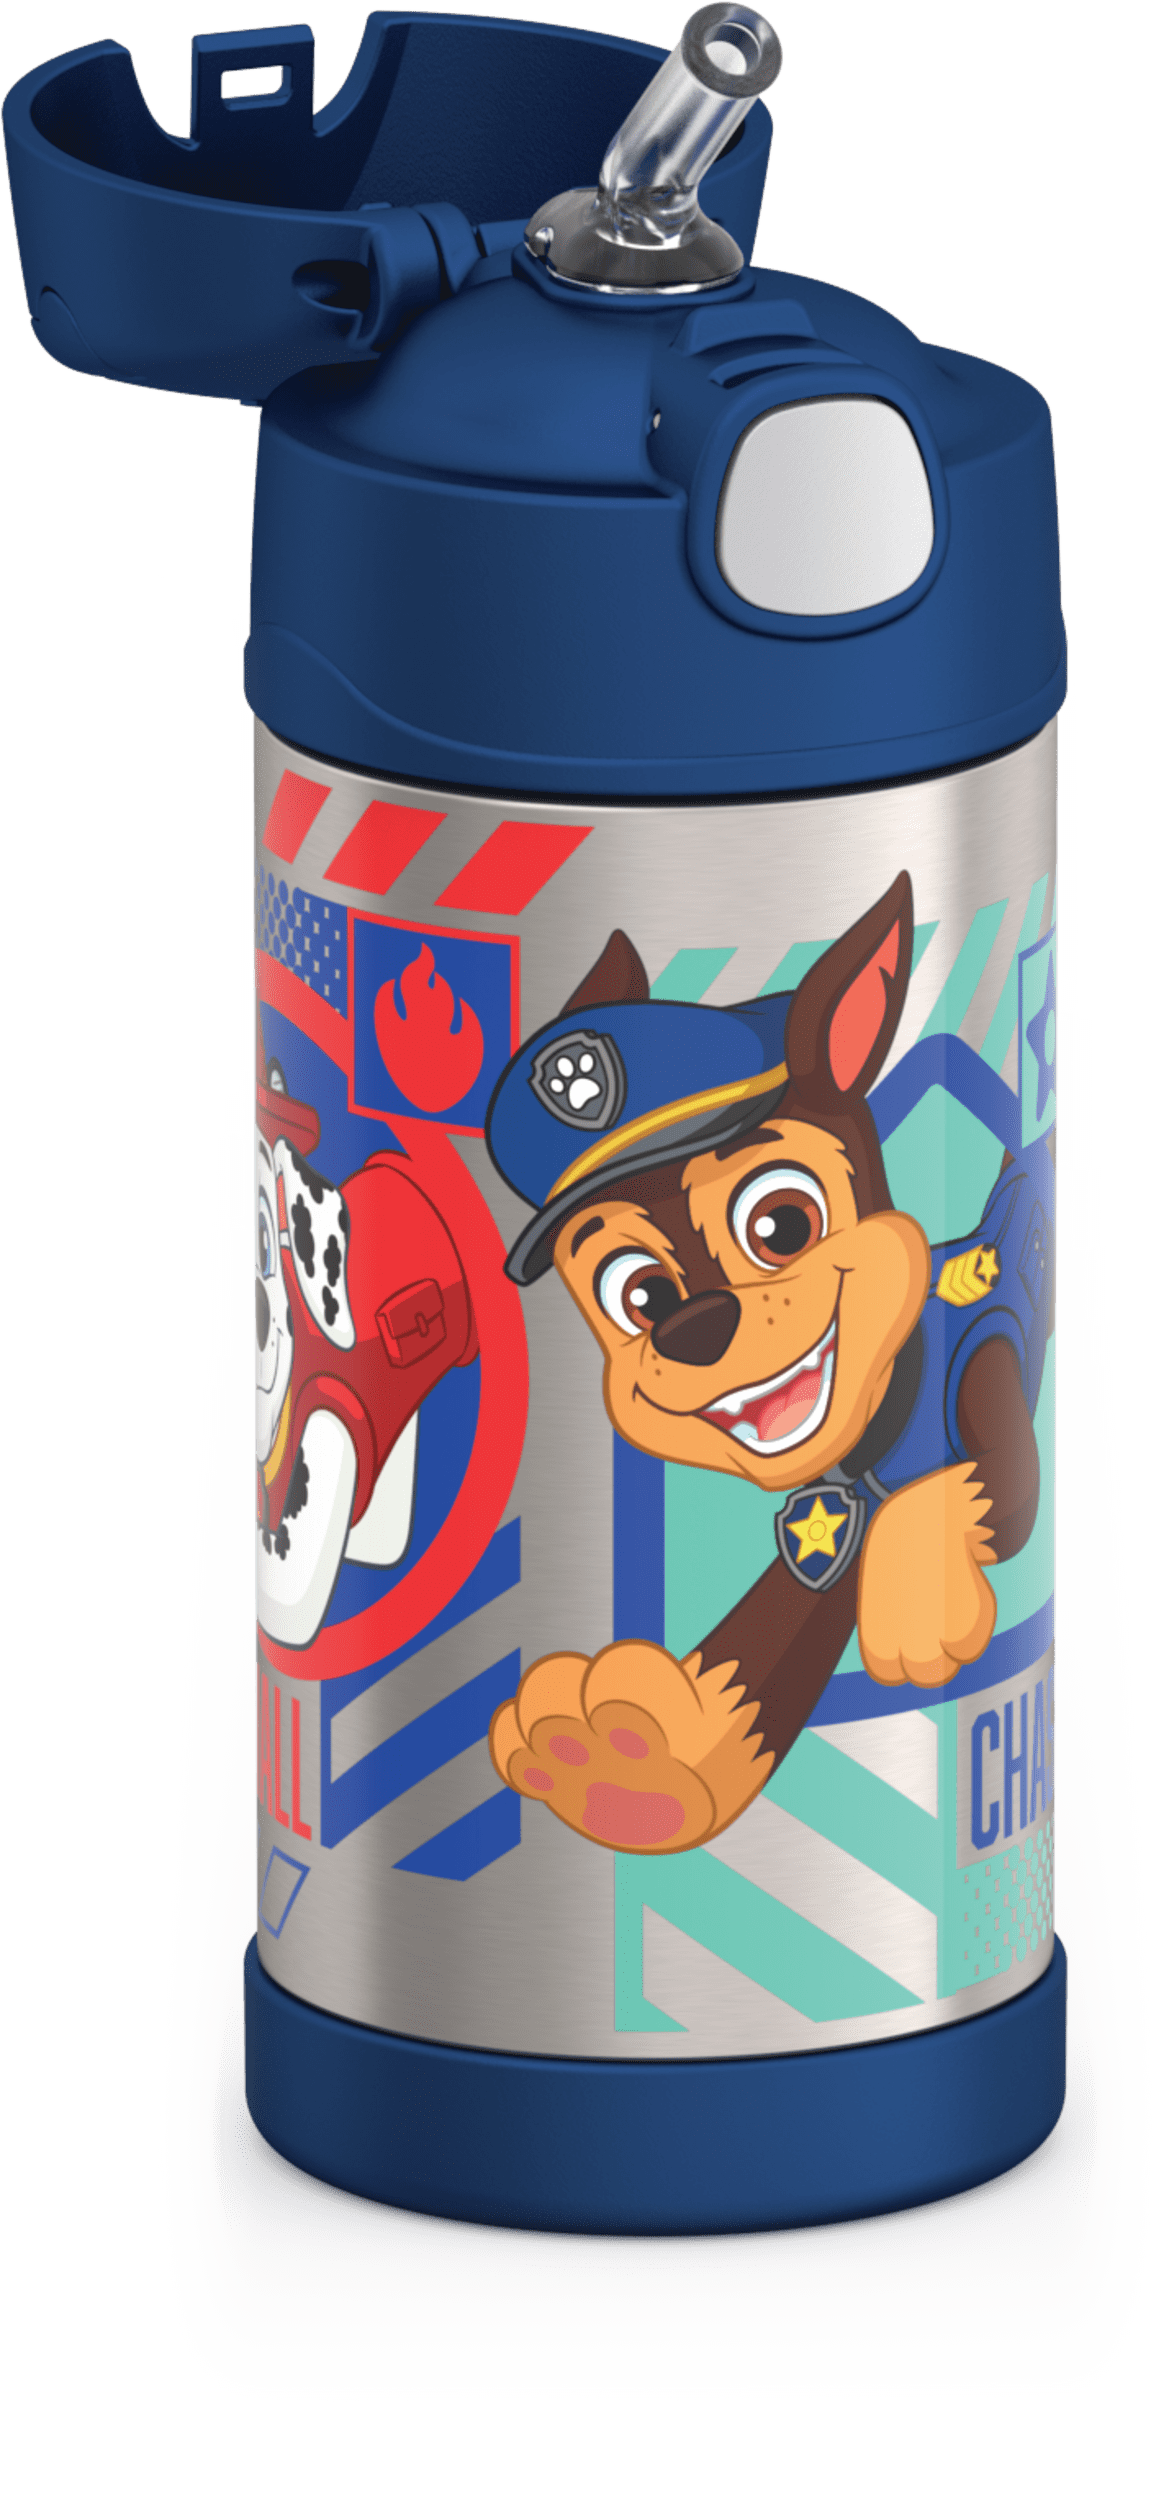 Pawoopawoo 8oz Kids Thermos for Hot Food, Stainless Steel